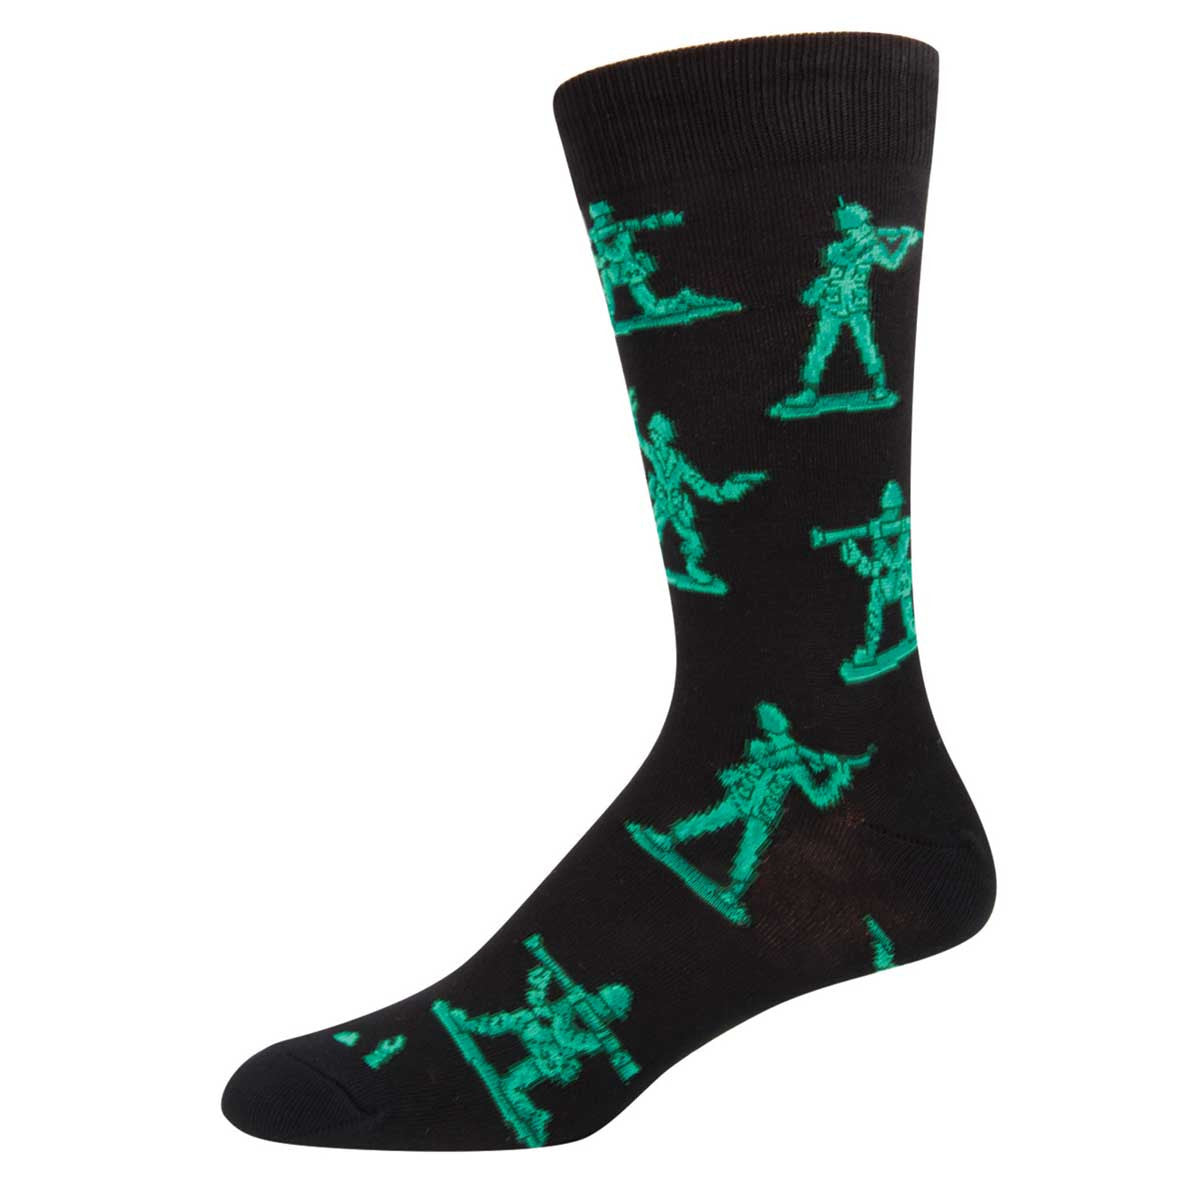 Toy Soldiers Men's Army Socks